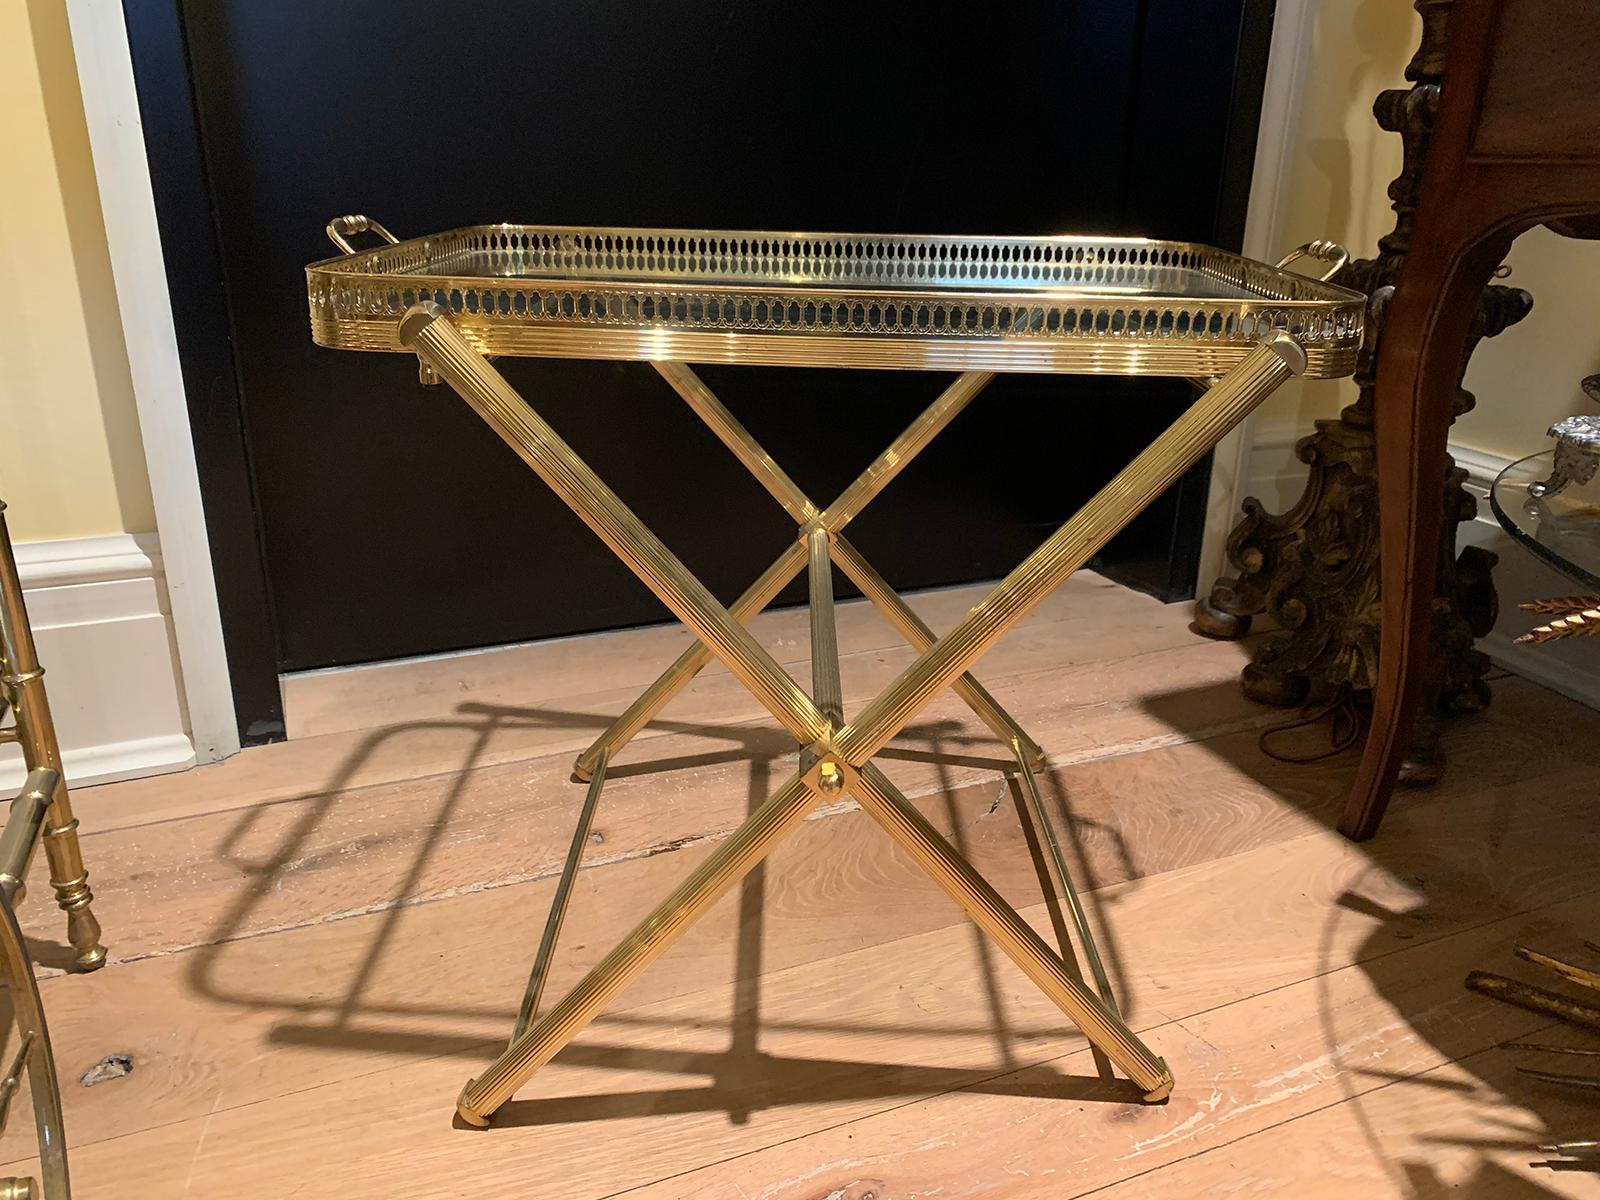 Mid-20th century Italian brass and glass tray on folding stand as side table.